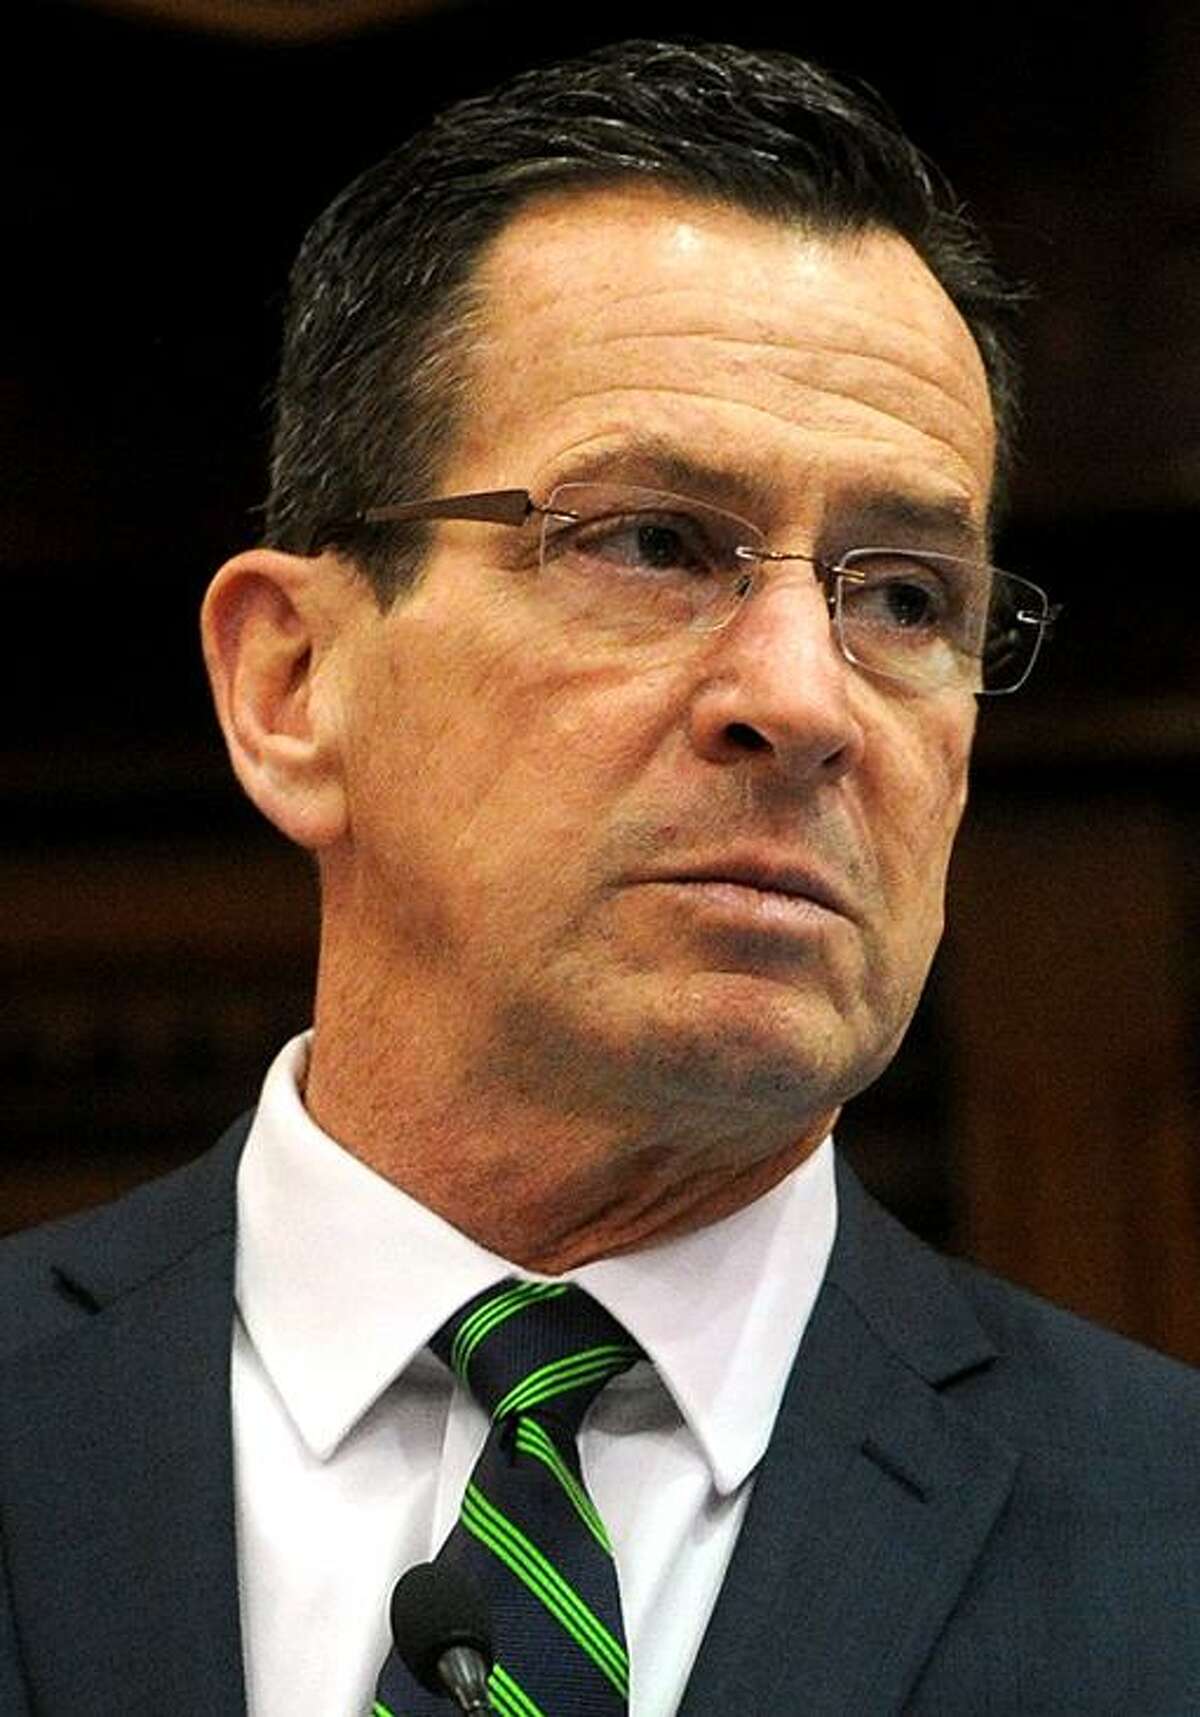 Embattled Gov. Dannel P. Malloy said Republicans use the issue of “mental health” in an attempt to derail gun-safety legislation and stay on the right side of the National Rifle Association. “They don’t care about the truth,” said the two-term Democrat during an interview with Hearst Connecticut Media.